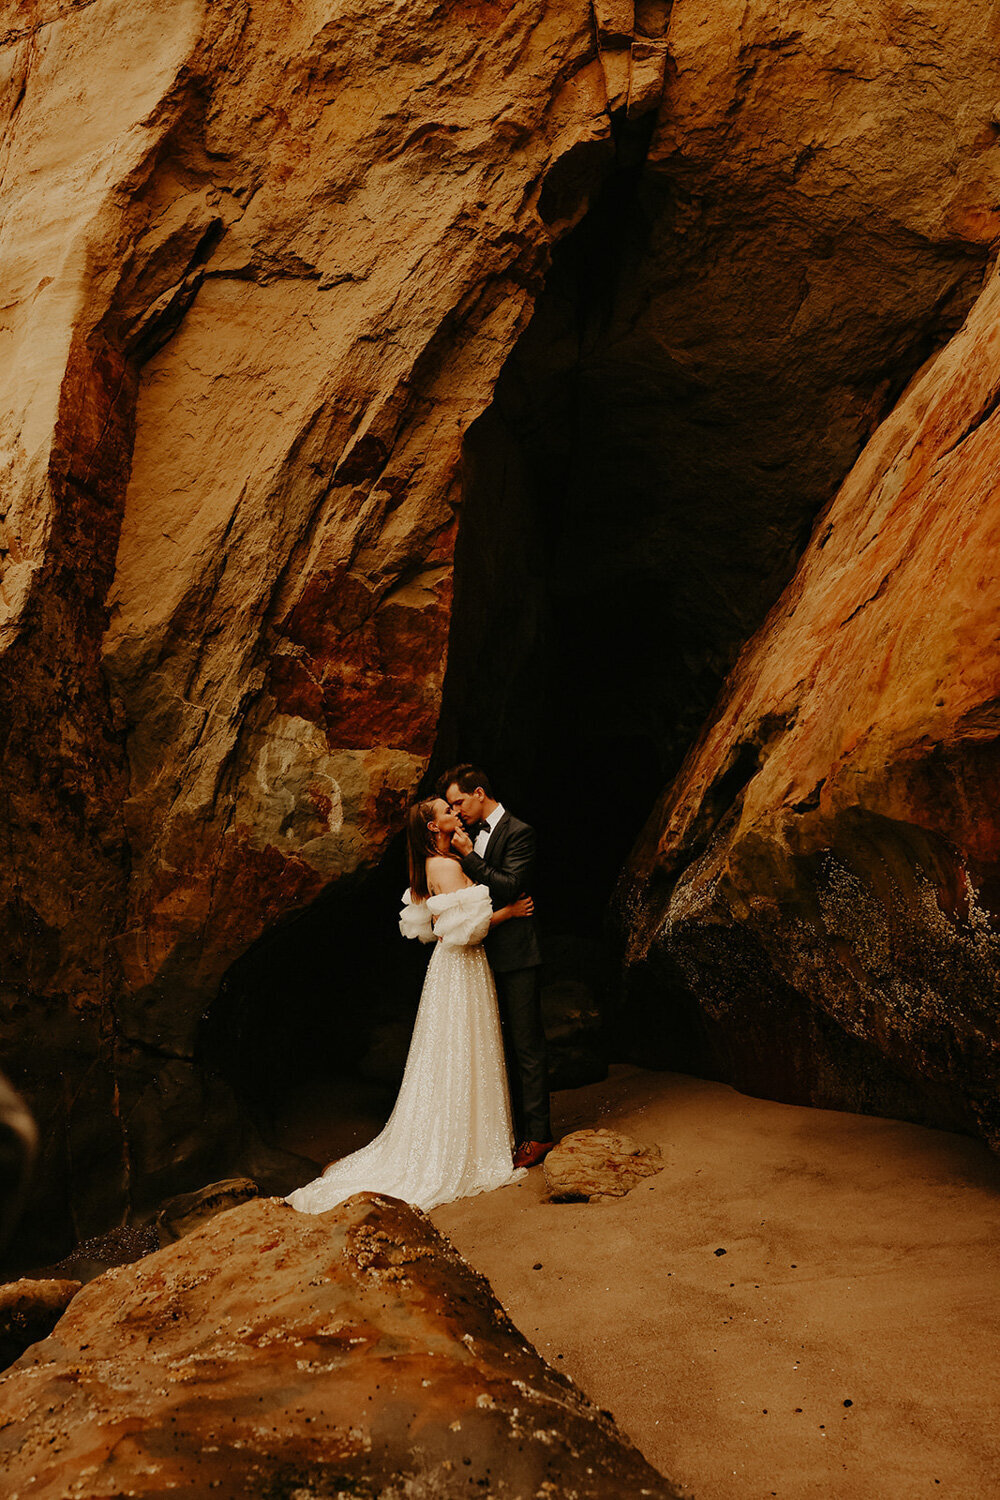 Bride and groom kissing under a rock formation